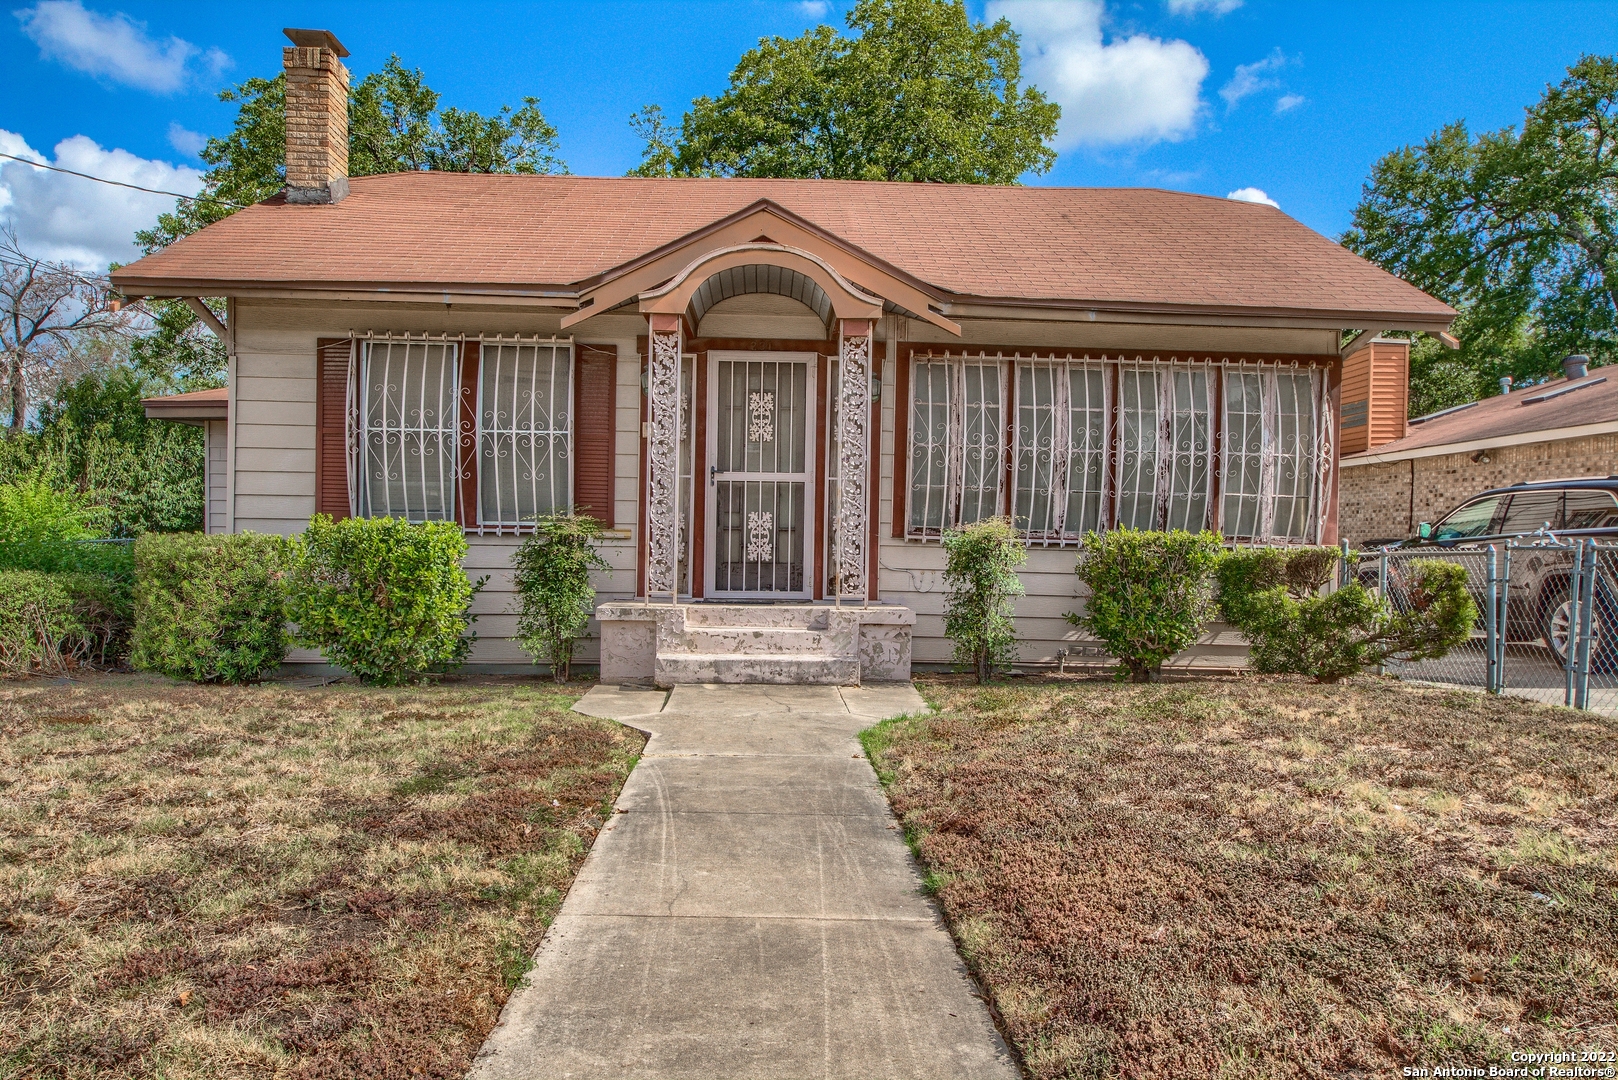 Vintage home in Denver Heights just off So. New Braunfels. Convenient to downtown, Alamodome, AT&T Center, IH10, IH35, and IH37, Ft. Sam Houston & more.  This 1927 home has good bones but needs some TLC and is being SOLD AS IS. Carpet in LVR, DR, and front bedroom was recently removed to show the original hardwood floors. This 3 Bedroom/2 bath, home includes a large Den/Family RM. Plus, just off LVR is a bonus room that could be used as an office or other living space. Den/Family RM could also be a primary bedroom with a private bath.  Small rear bedroom next to laundry room could also be an office, playroom, or exercise room it's up to you. Living room features wood burning fireplace and built ins. All appliances convey. Roof - 10 yrs old, 40-gal water heater - 10 yrs old, AC - 5 yrs. old, Security System conveys. Only street parking available. Two large pecan trees give ample shade for the backyard.  Many new builds going on in this area.  **CHANDELIER IN DINING ROOM AND EXTERIOR HANDICAP RAMP DO NOT CONVEY**